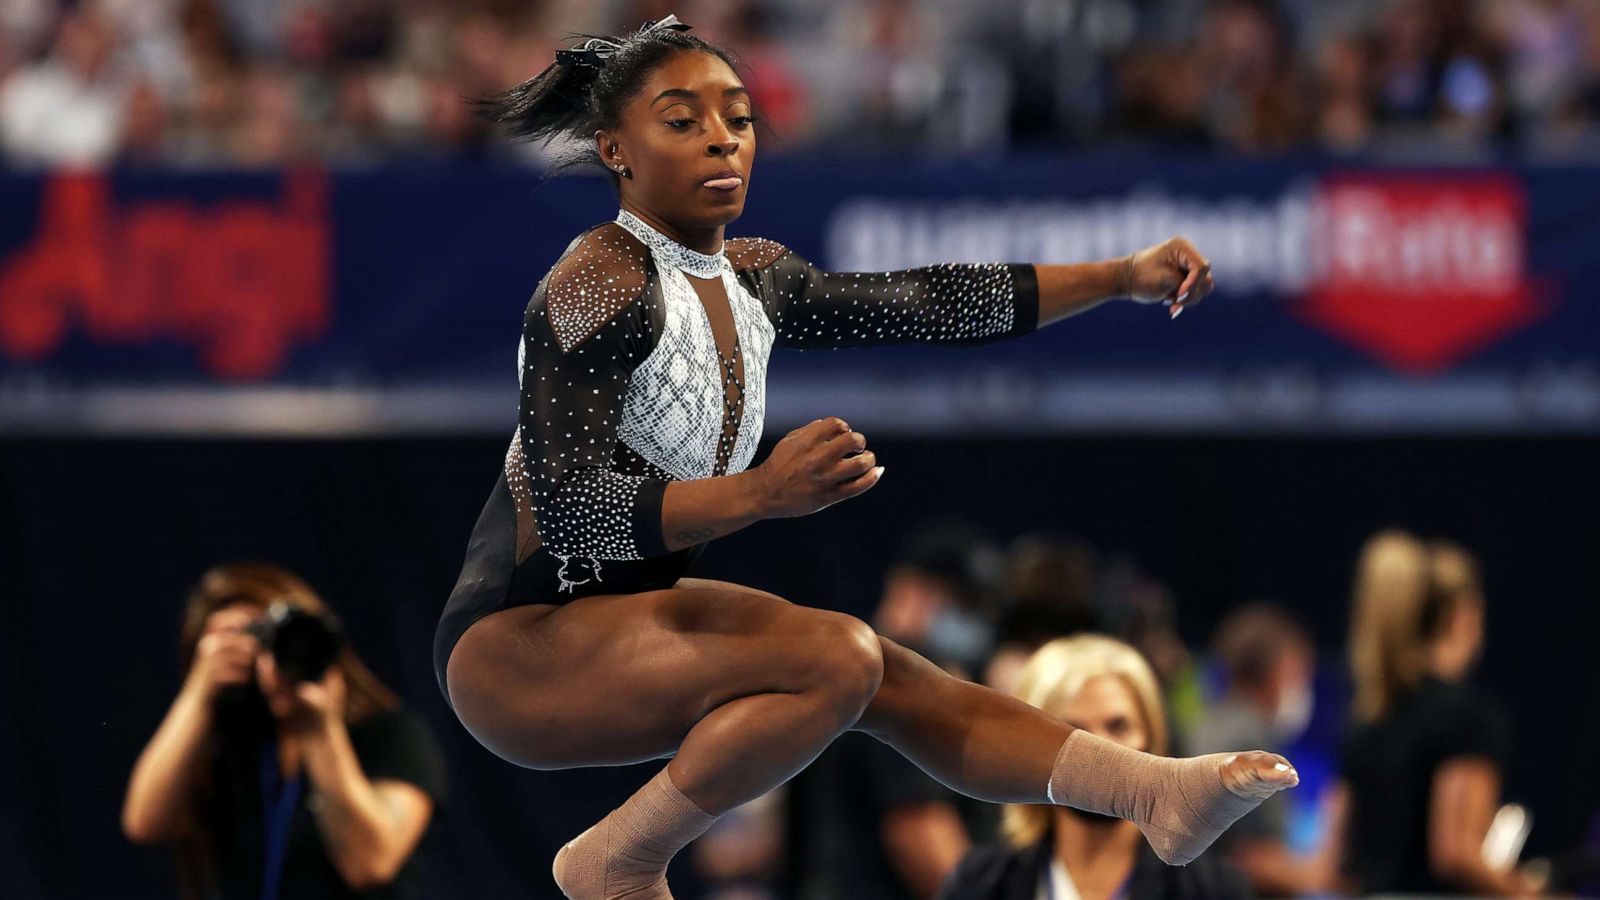 US Olympic women's gymnastics trials feature more diverse athletes, but  barriers persist - ABC News